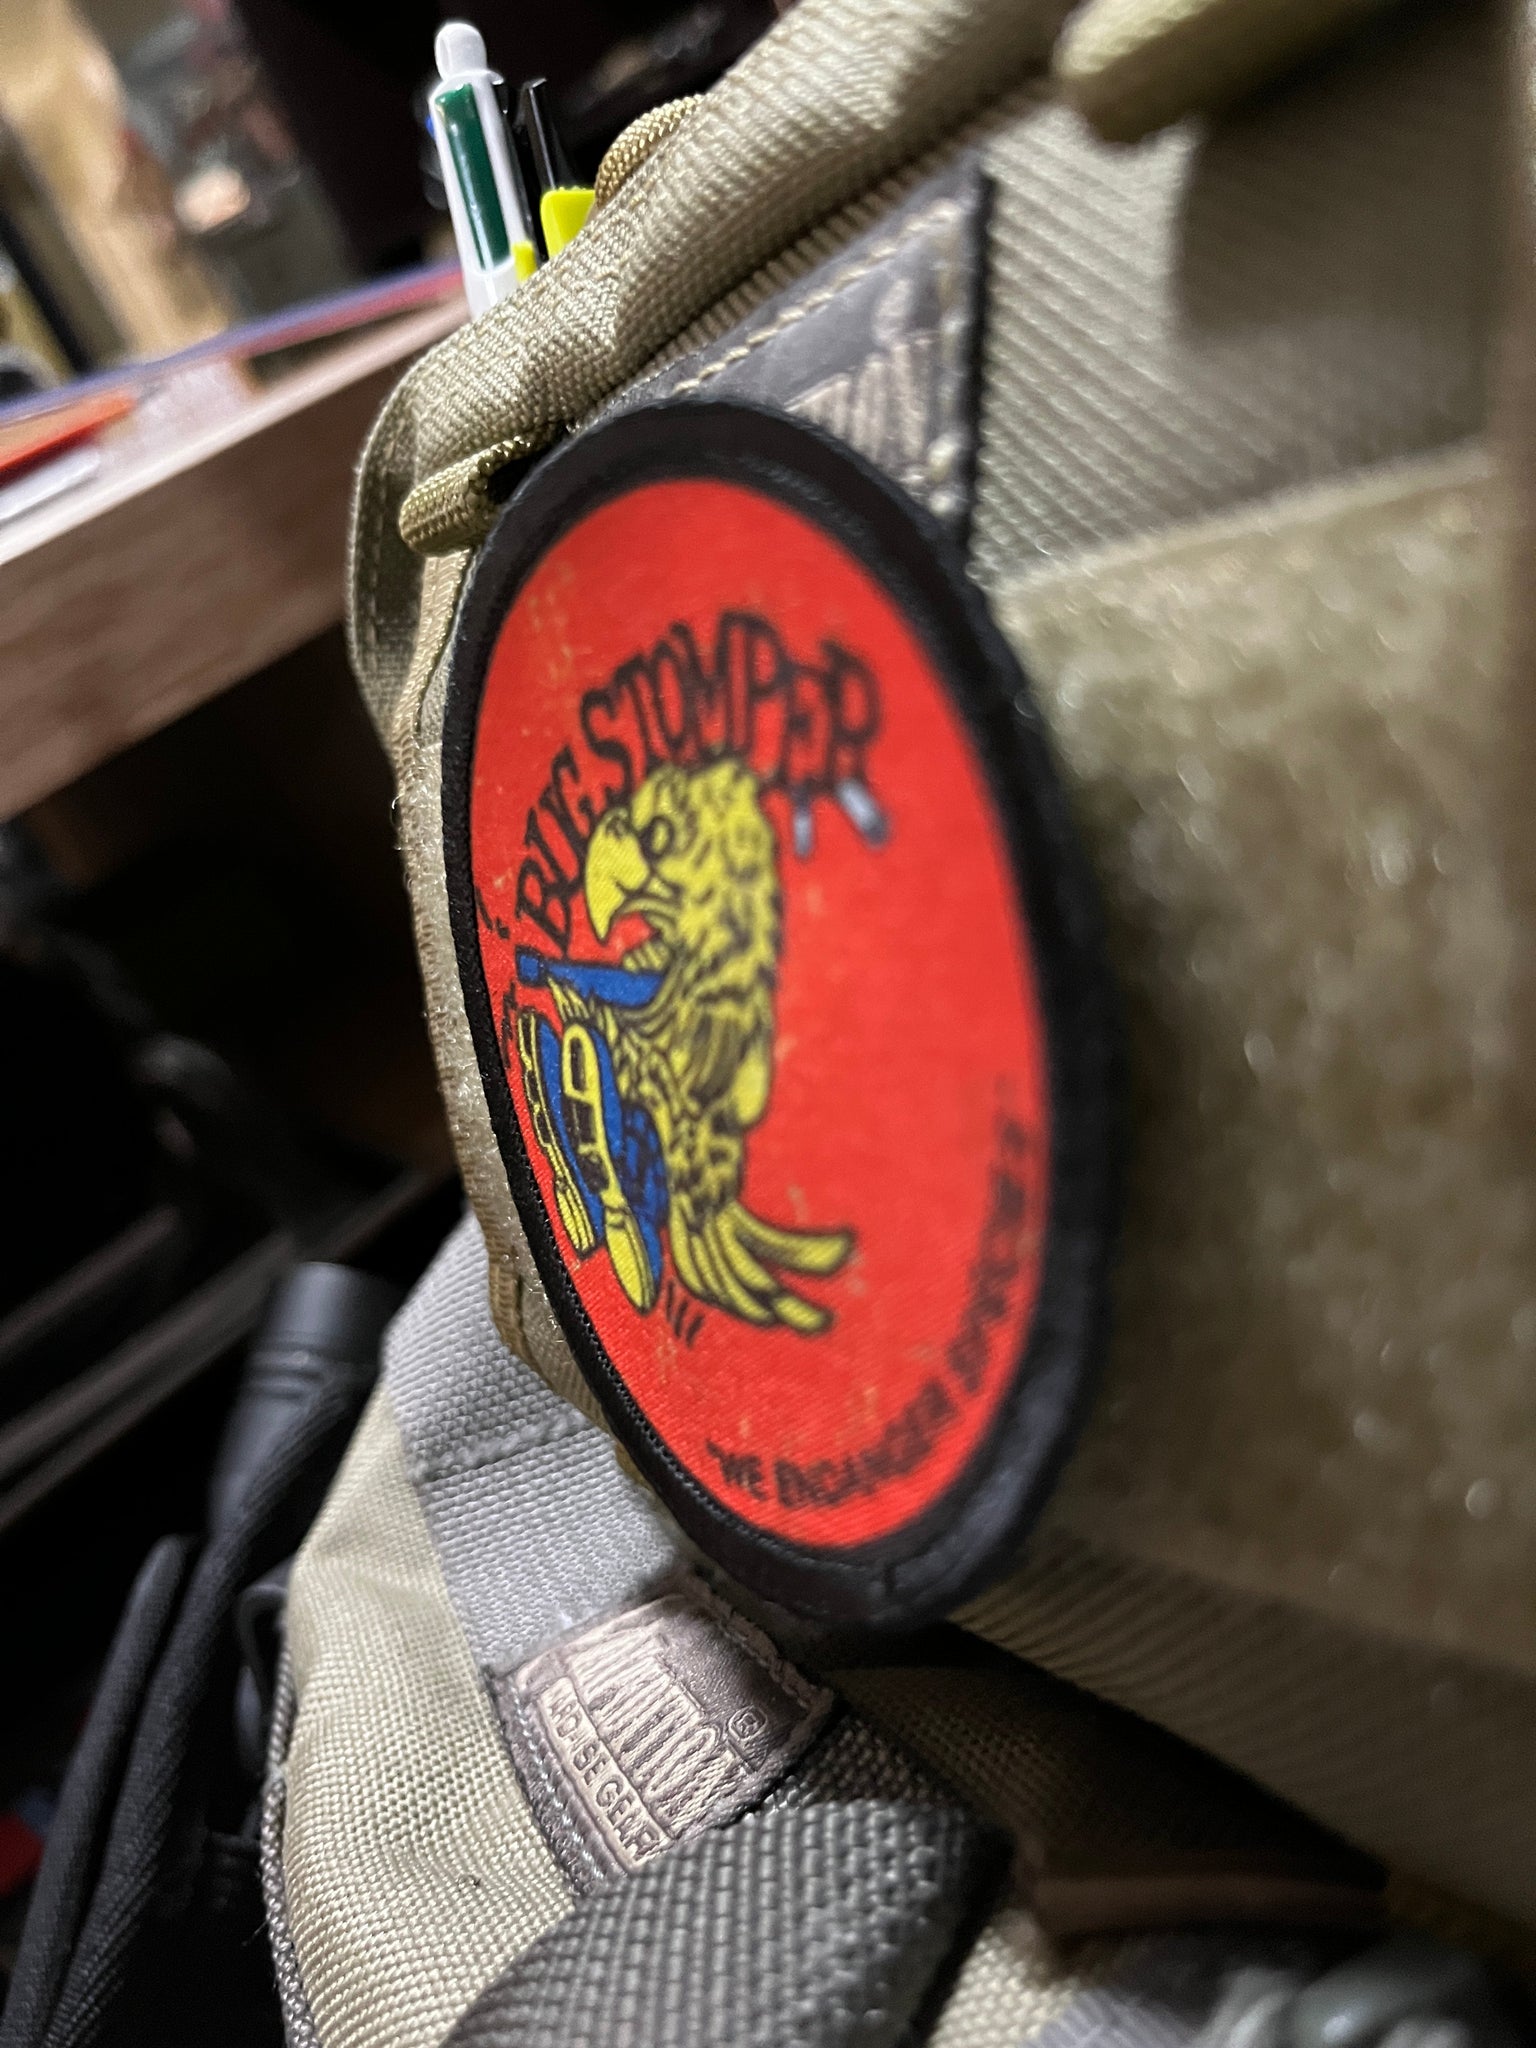 Custom Airsoft Patches  Velcro Airsoft Patch Maker